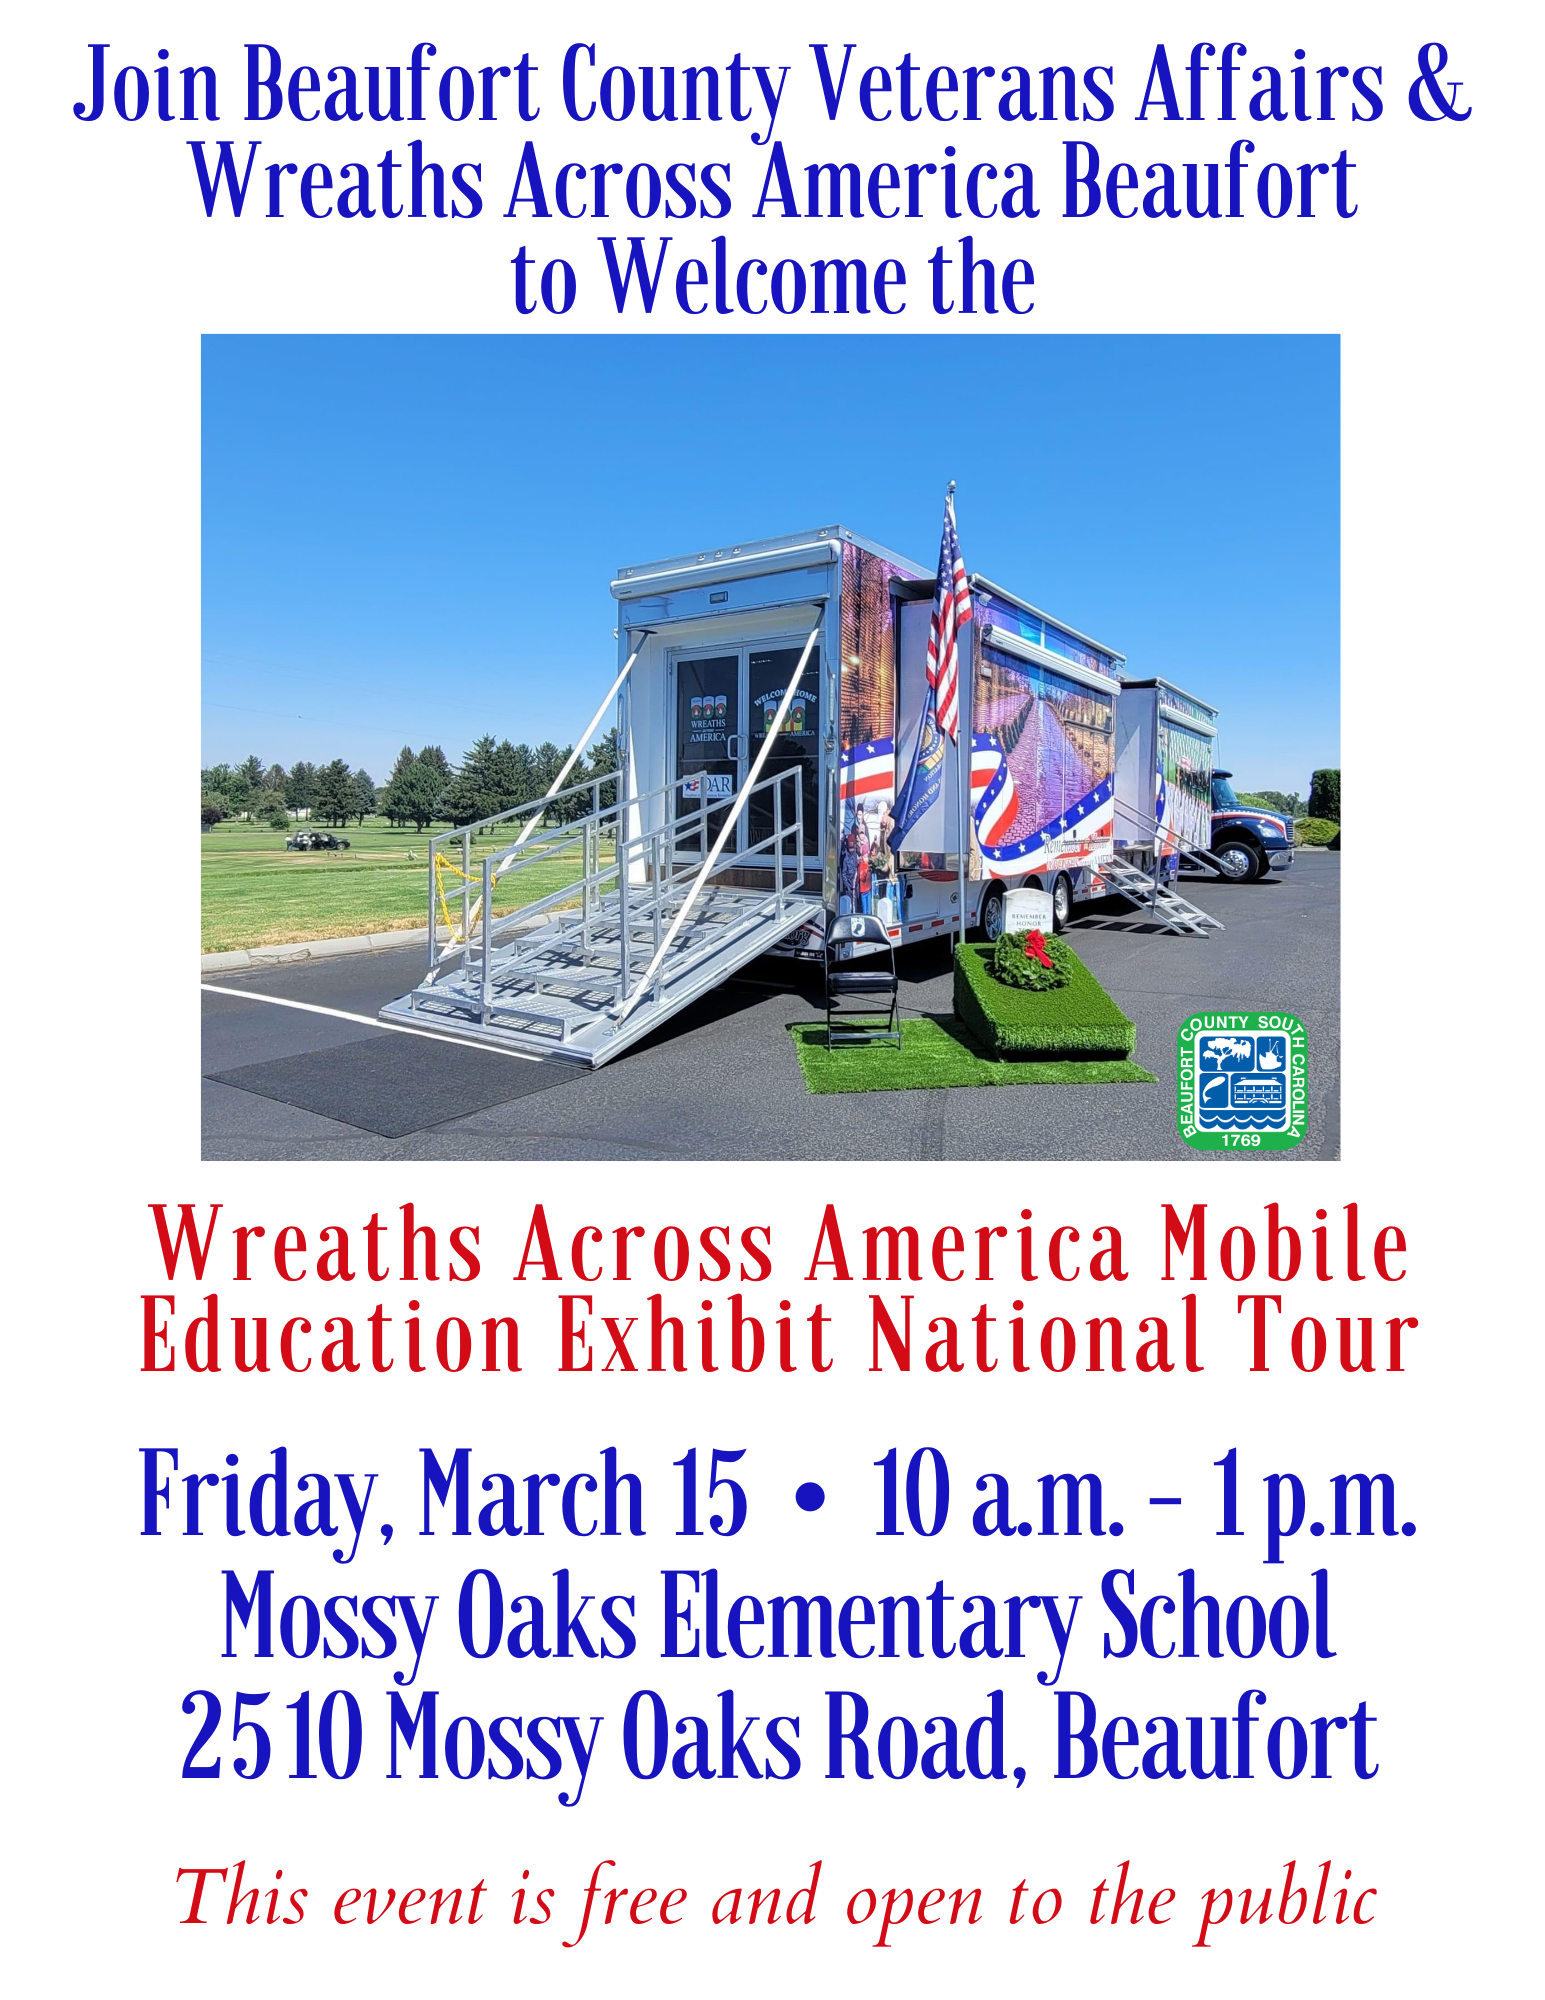 Beaufort County Veterans Affairs and Wreaths Across America Beaufort Host National Mobile Education Exhibit Friday, March 15